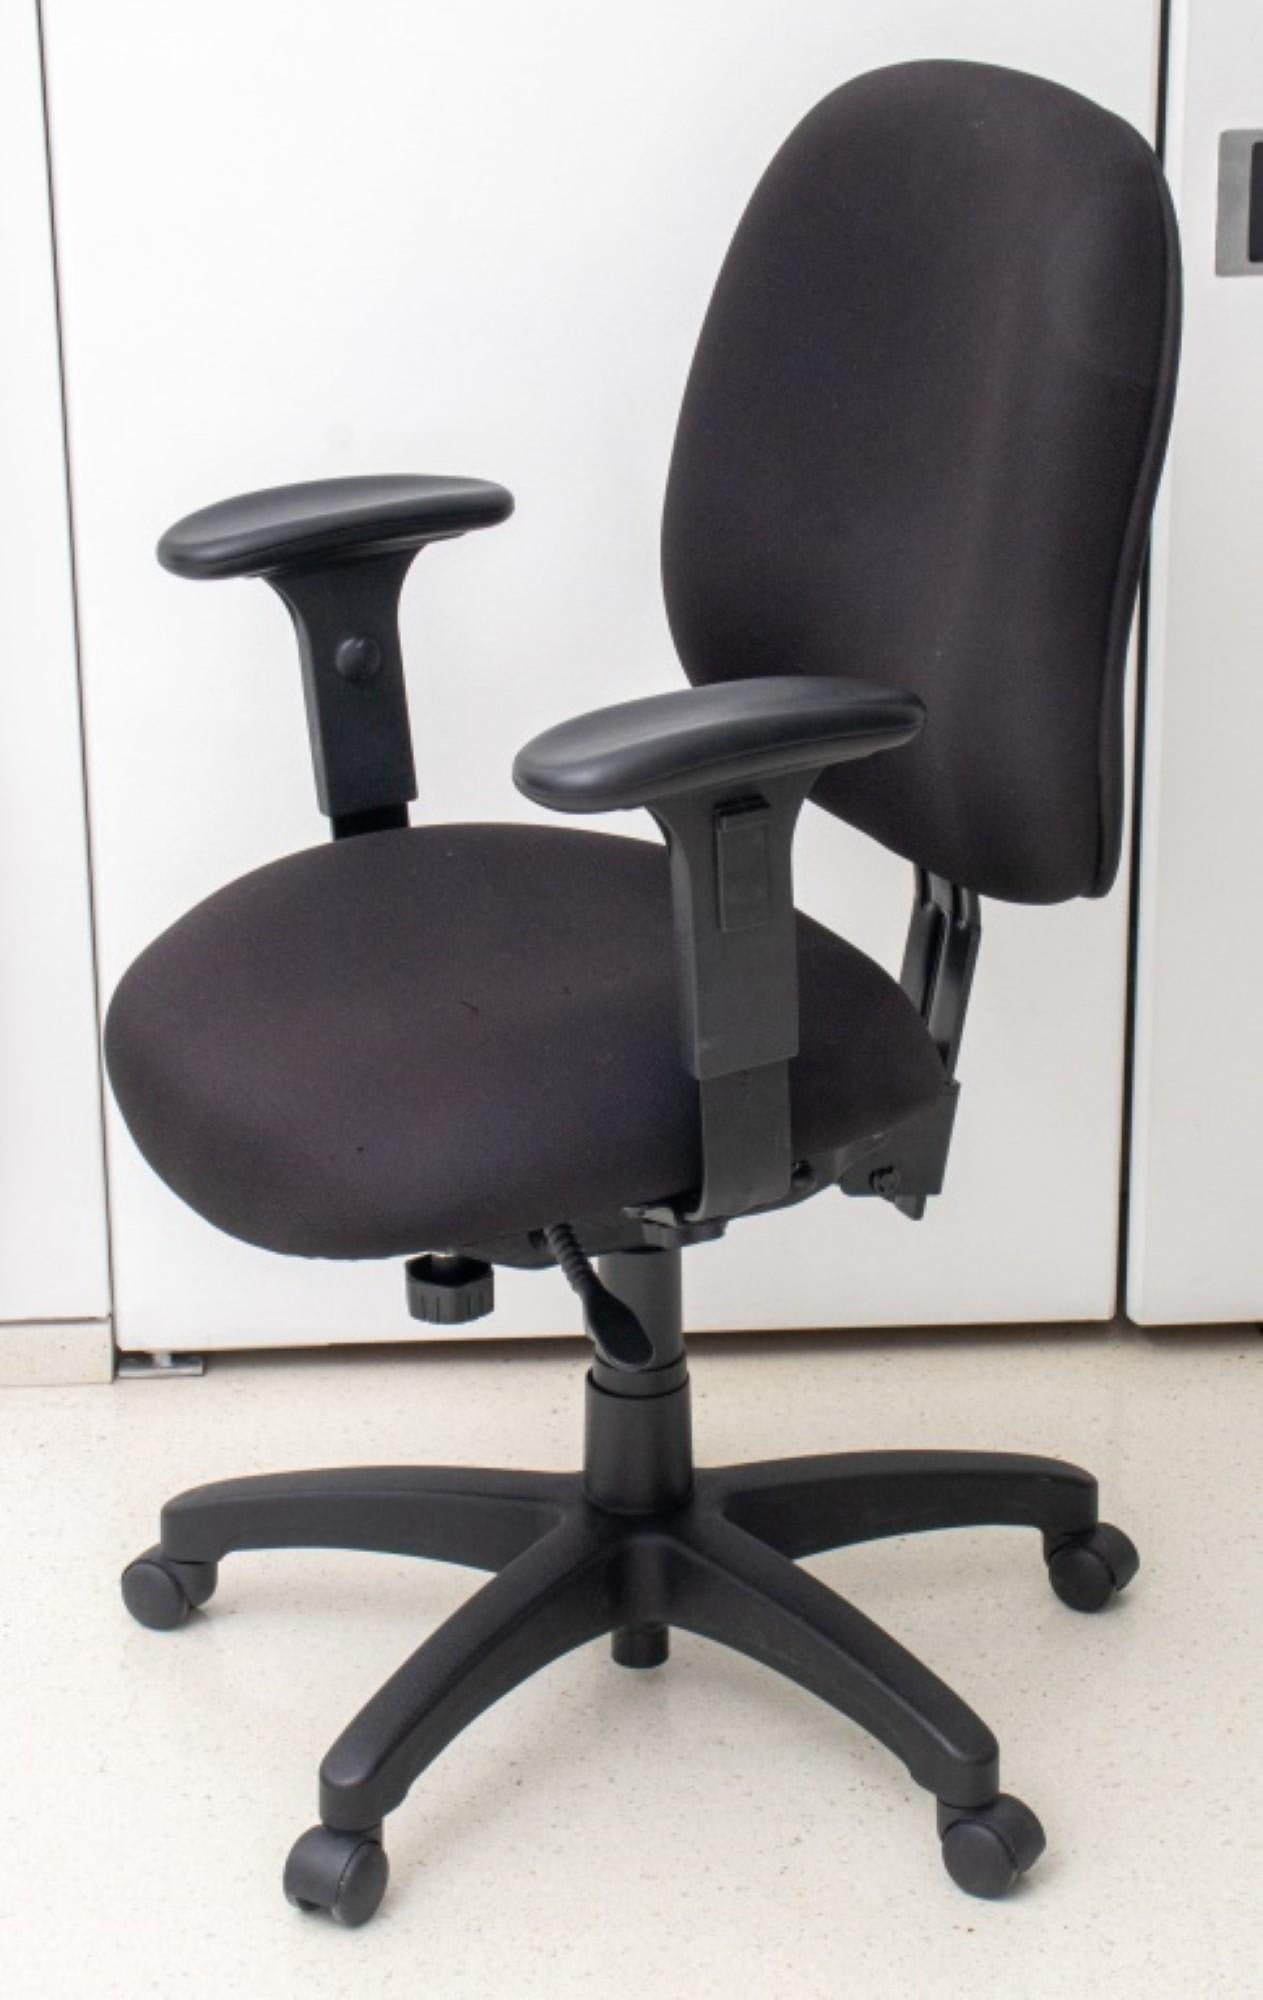 The office chair you described has adjustable features, including an adjustable back, arms, and seat. 

 Dimensions are 32 inches in height (adjustable), 26 inches in width, 24 inches in depth, and an adjustable seat height ranging around 18 inches.